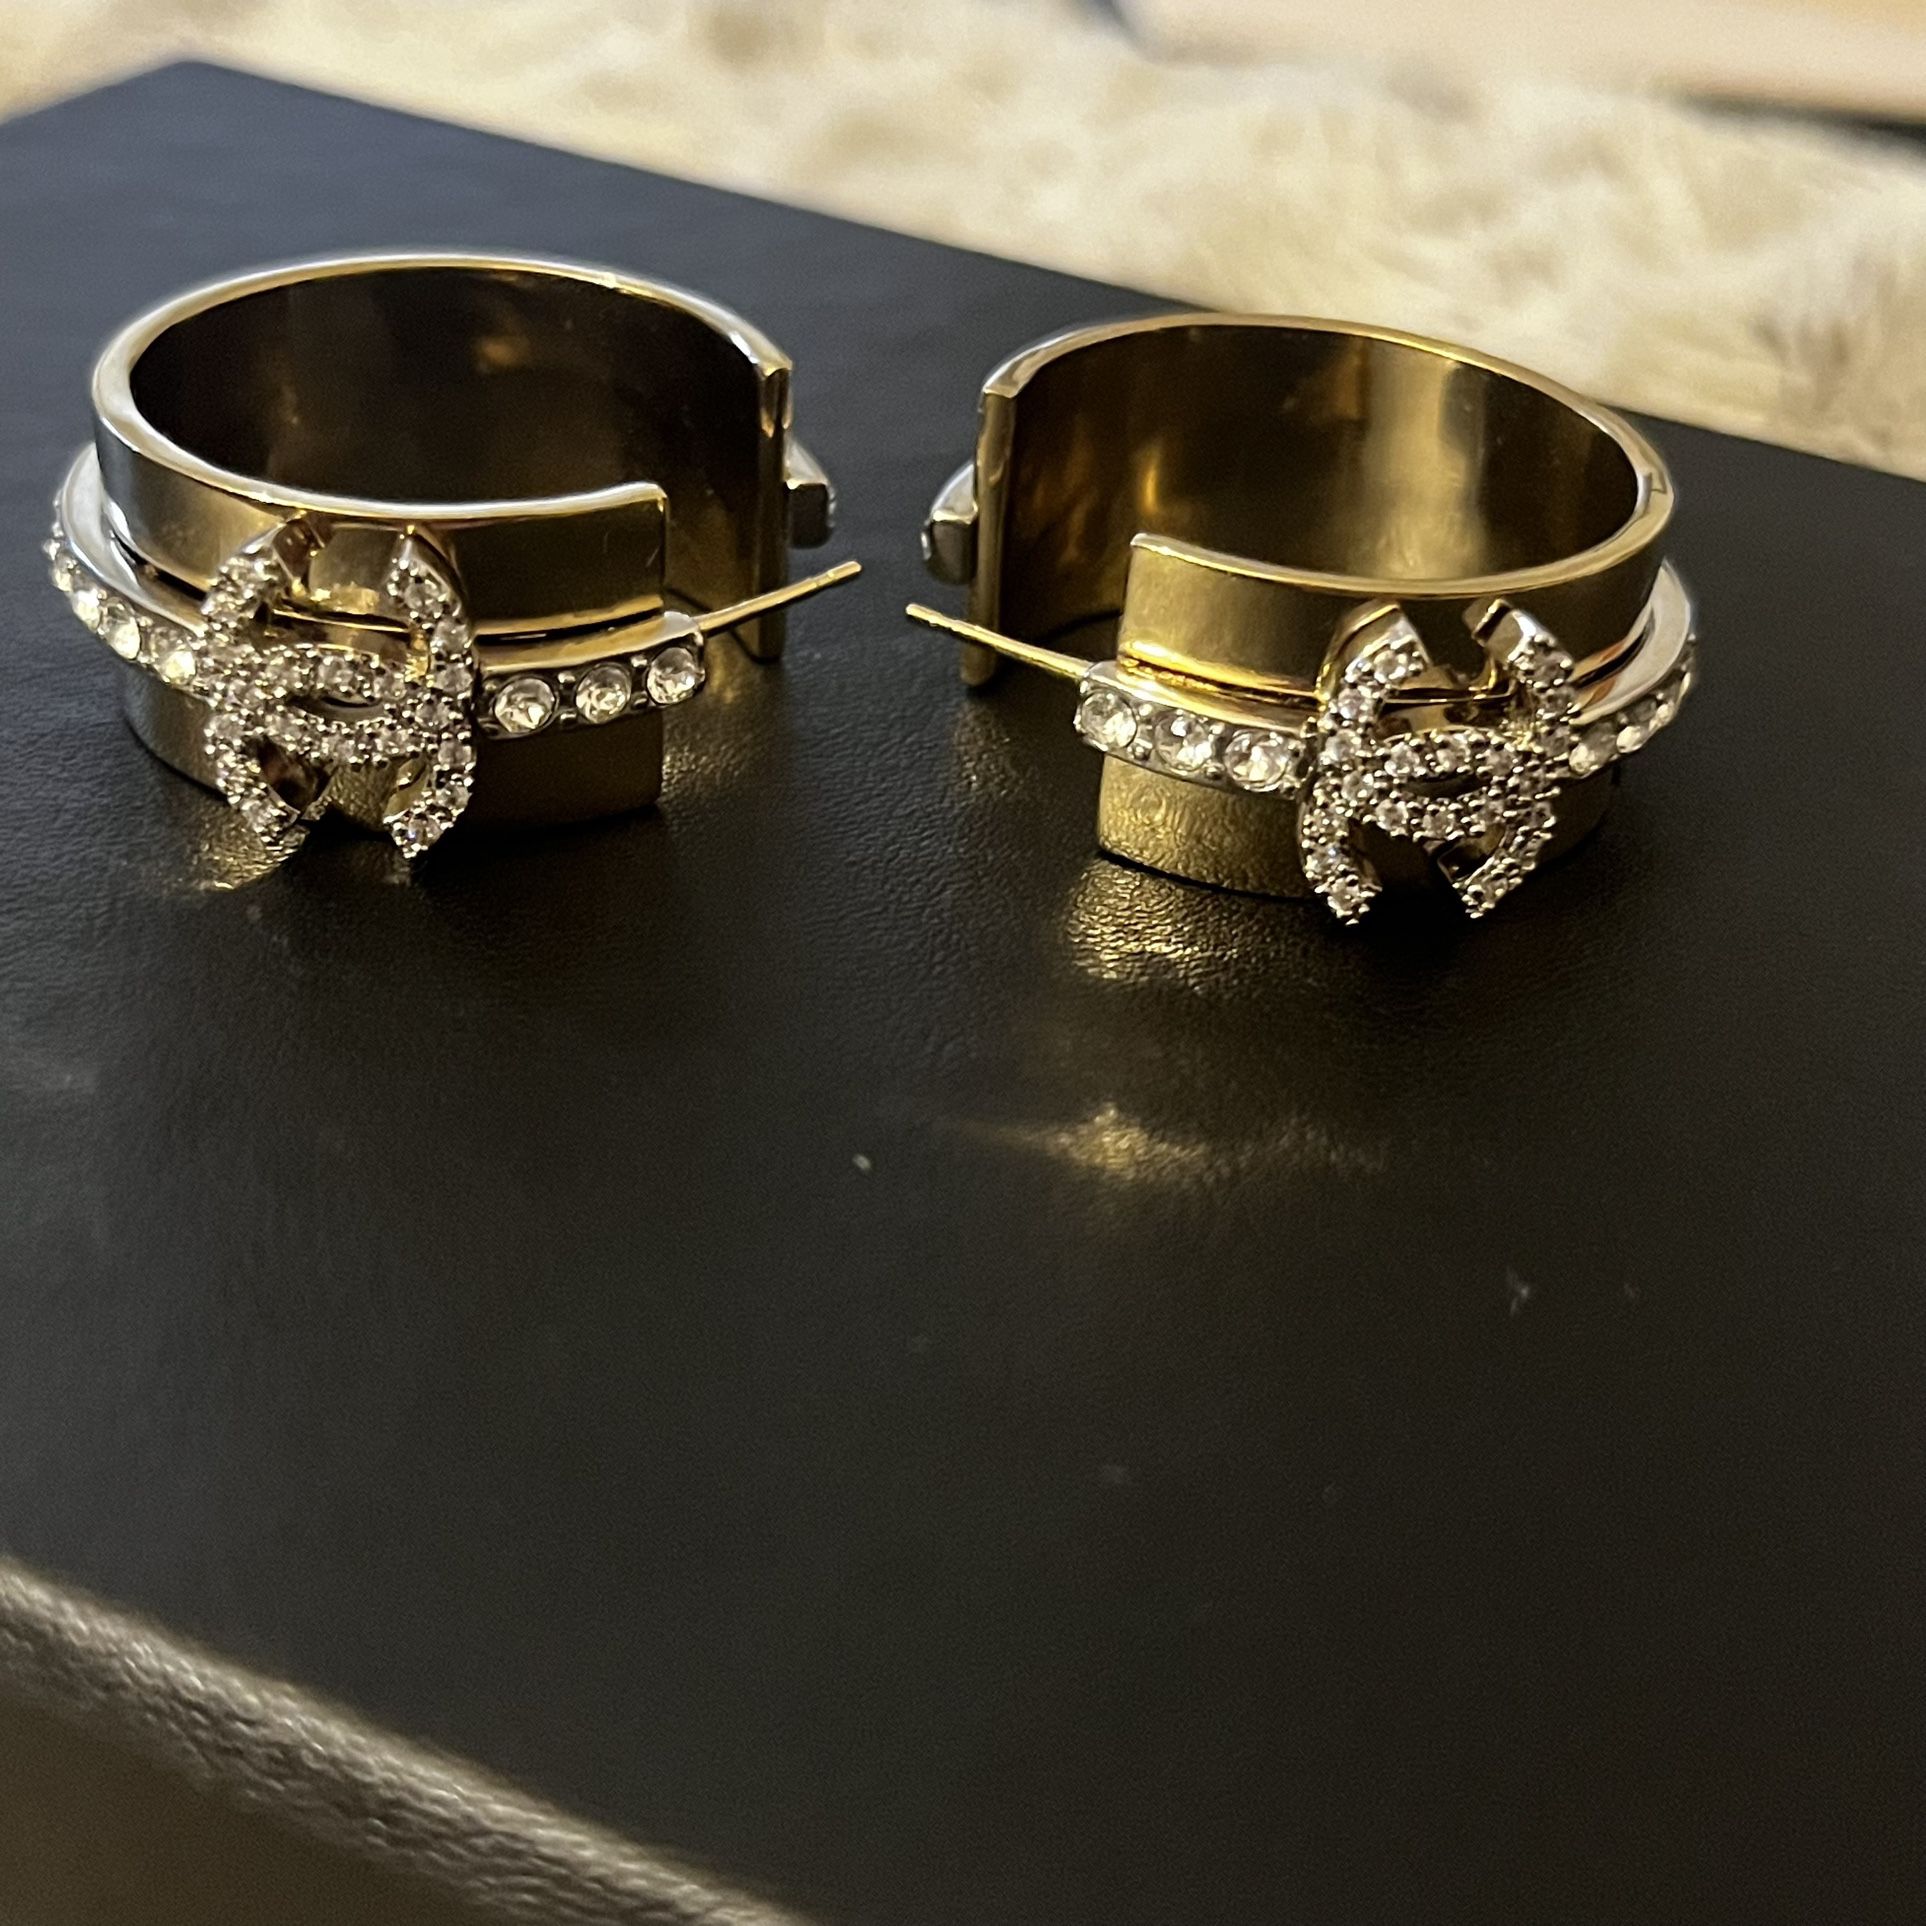 REDUCED! $500 Each Chanel Earrings Authentic! for Sale in Redwood